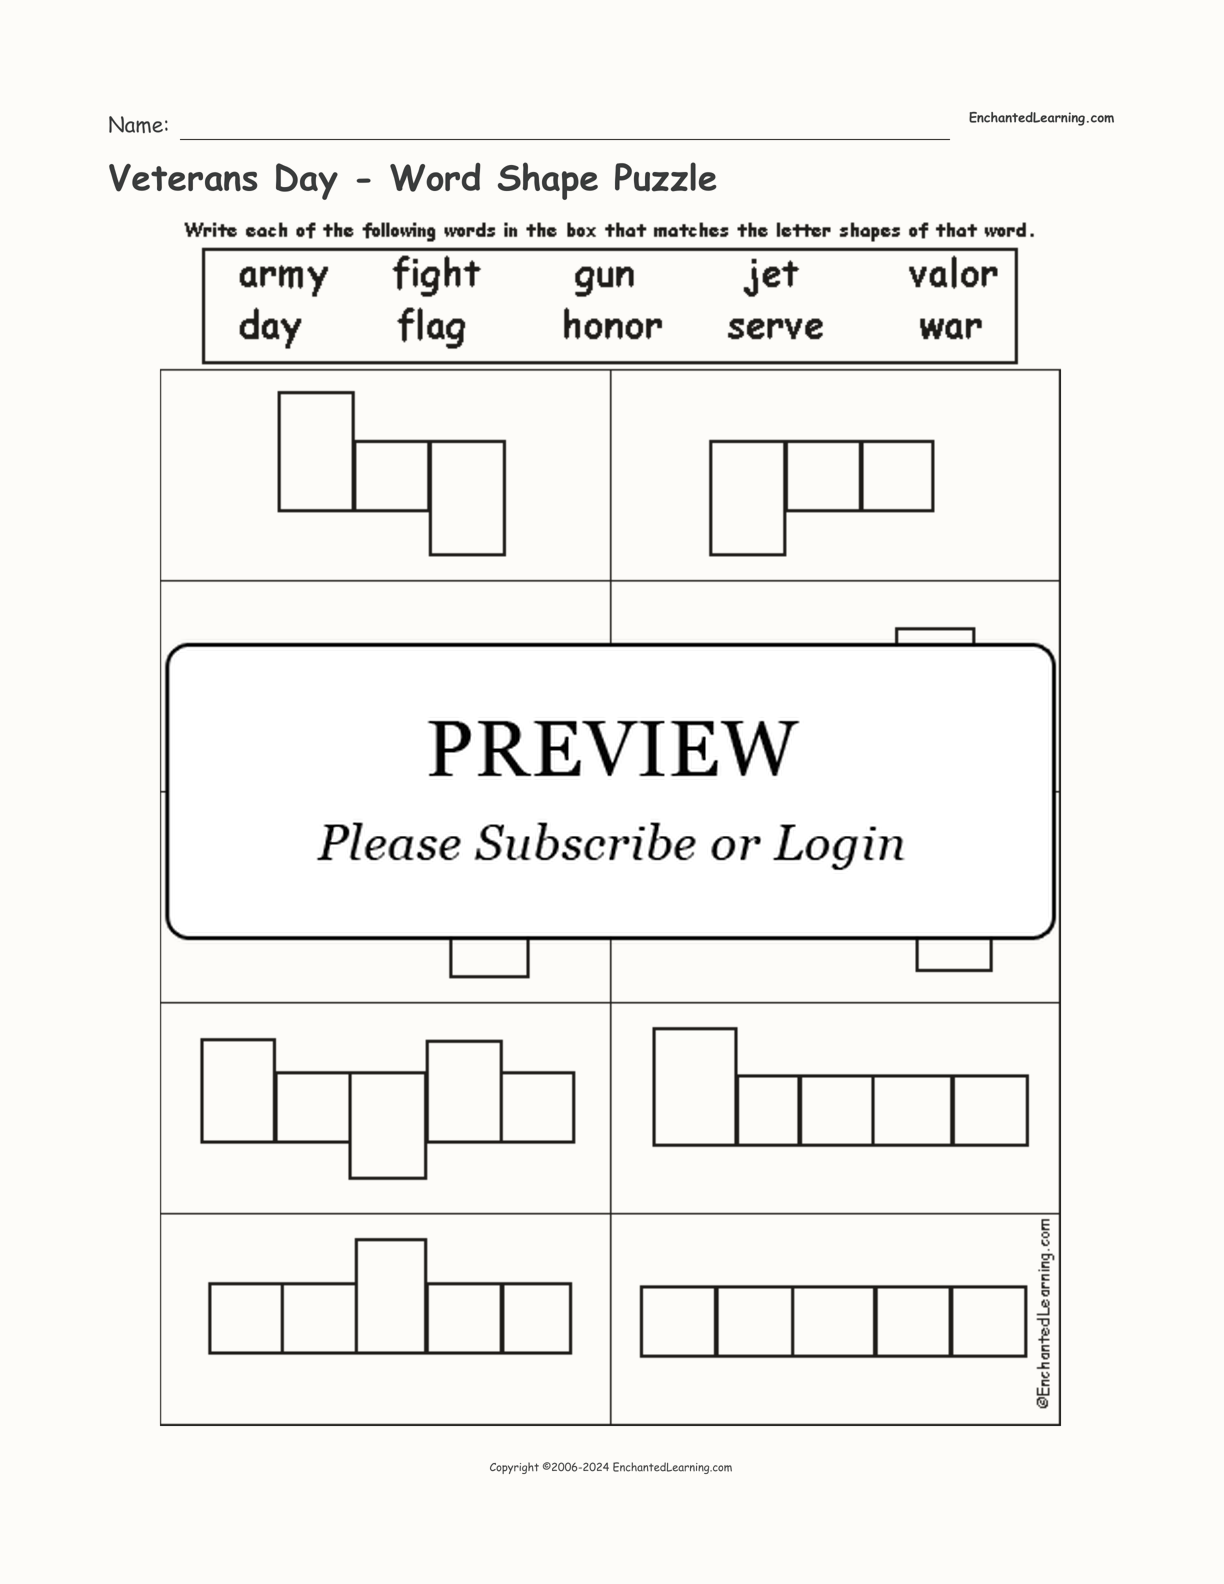 Veterans Day - Word Shape Puzzle interactive worksheet page 1